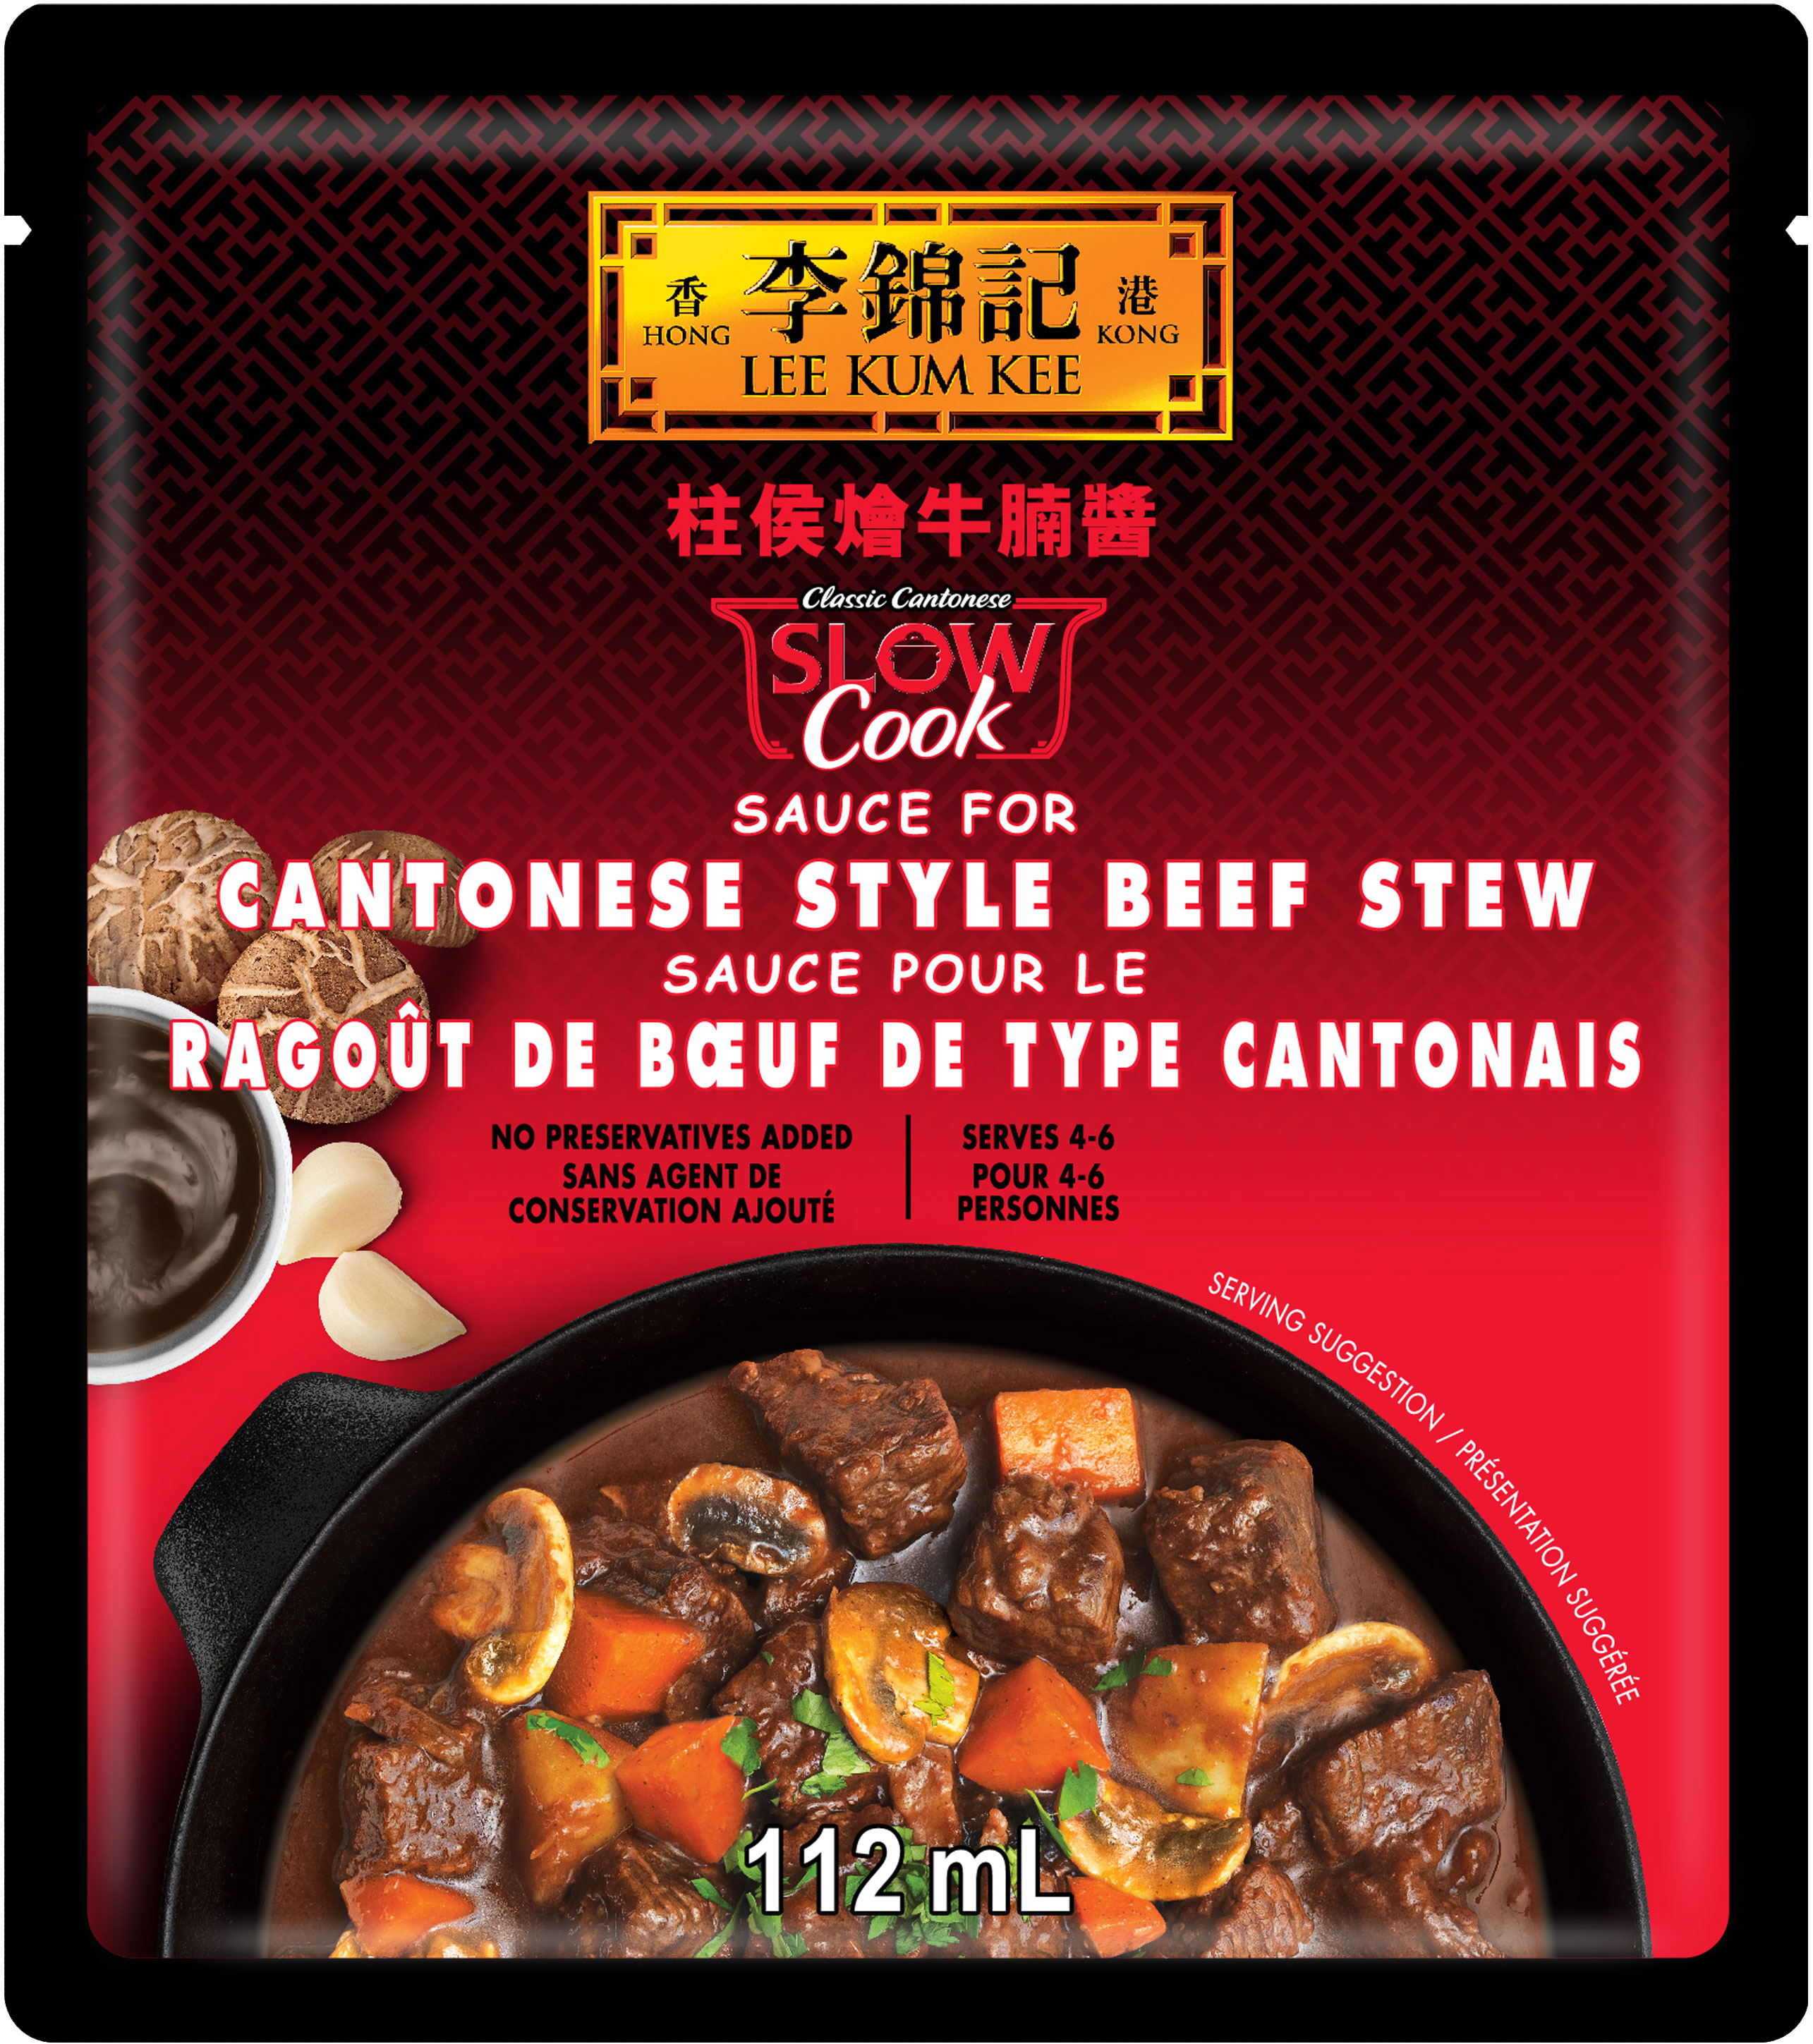 Slow Cook Sauce for Cantonese Style Beef Stew, 112 ml, Sauce Pack